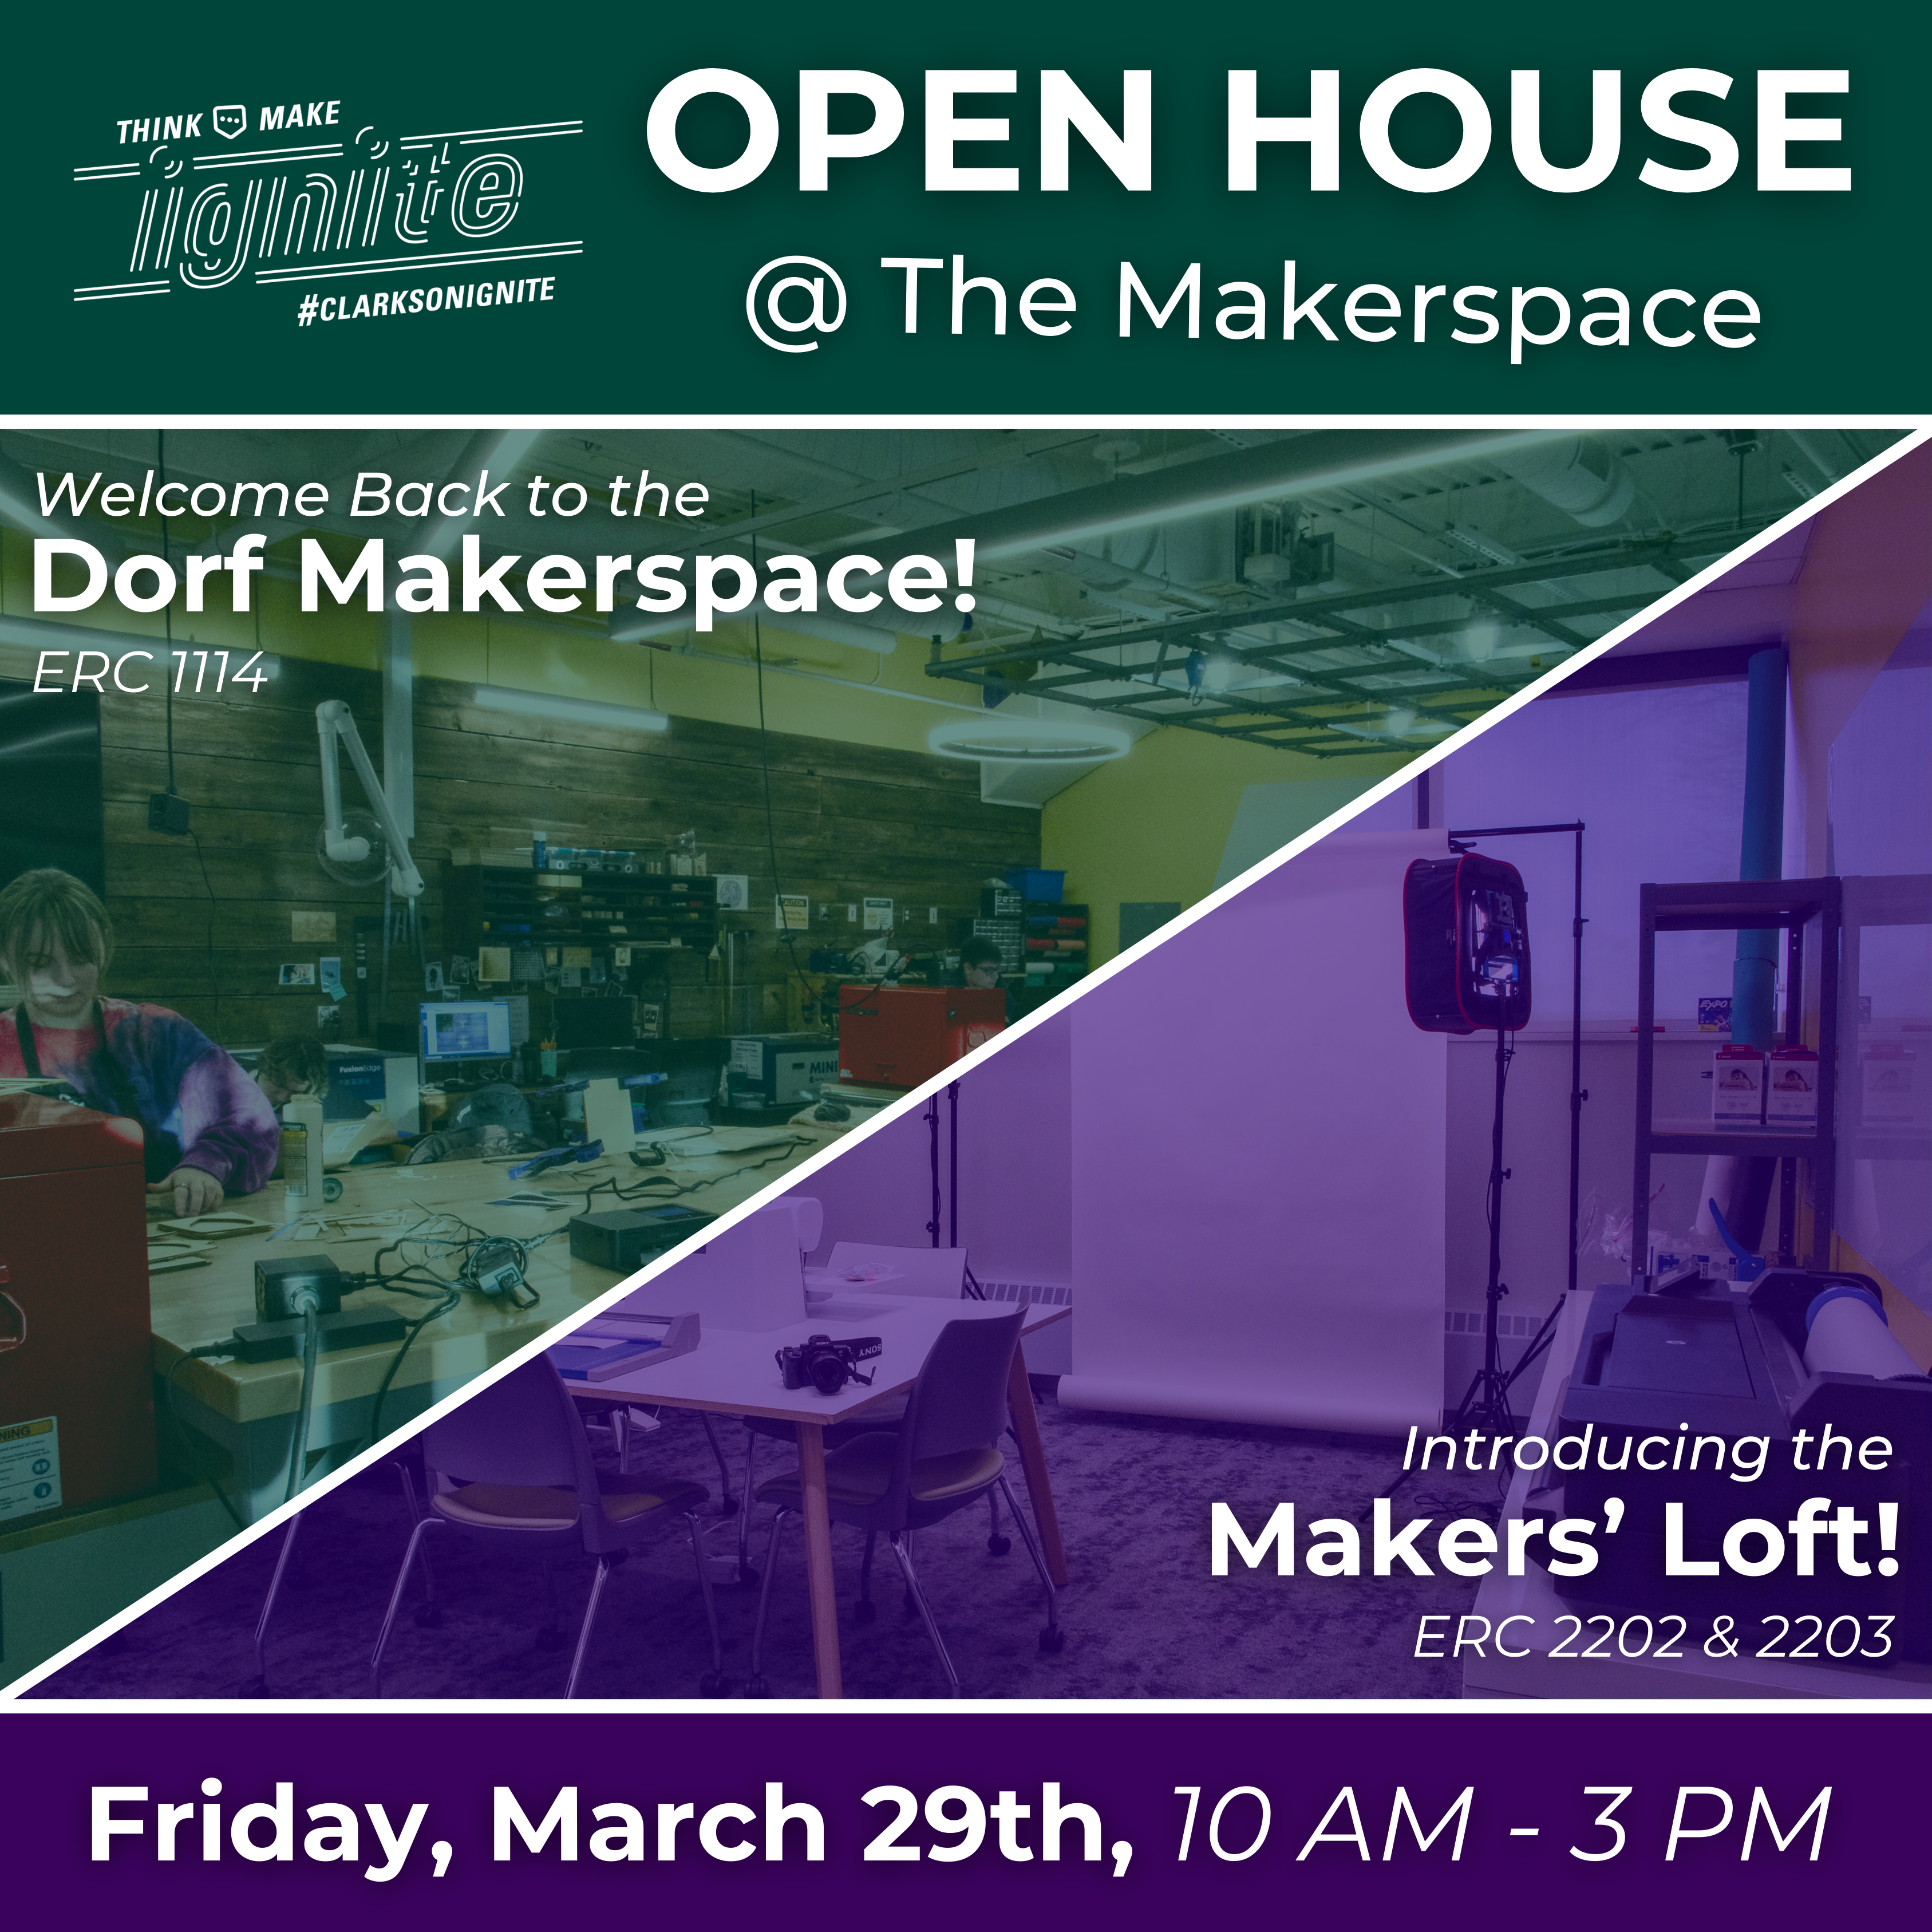 Open House @ The Makerspace – Happening This Friday!